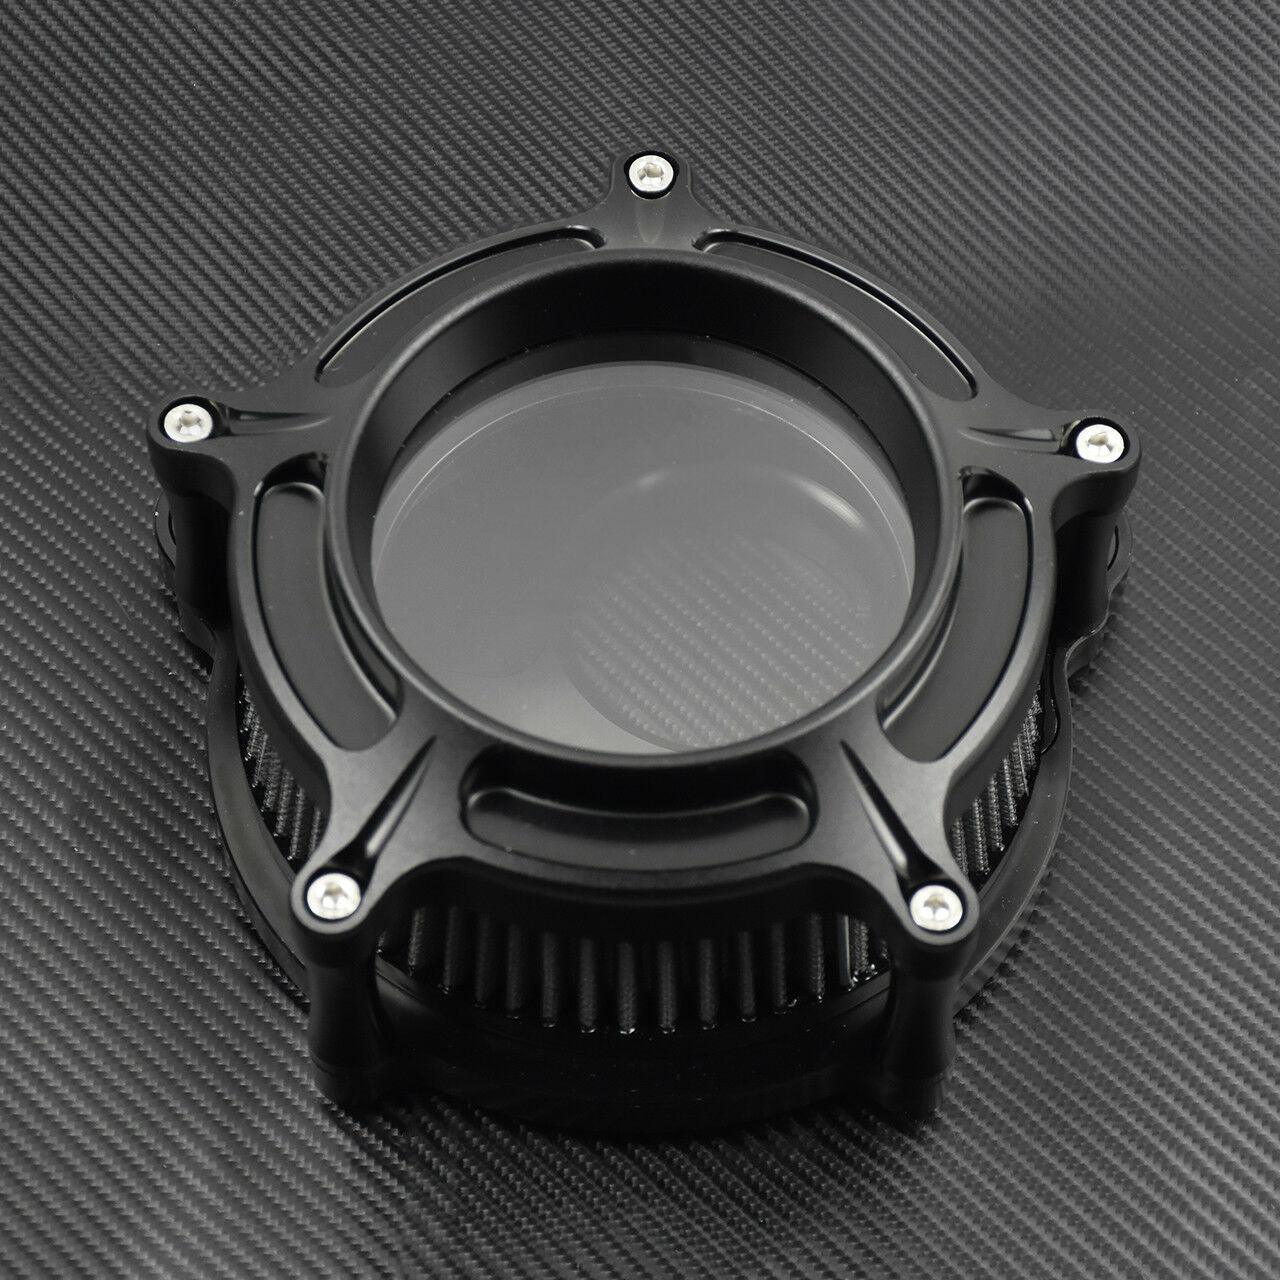 Clear Matte Black Air Cleaner Grey Filter Fit For Harley Touring 217-19 Softail - Moto Life Products